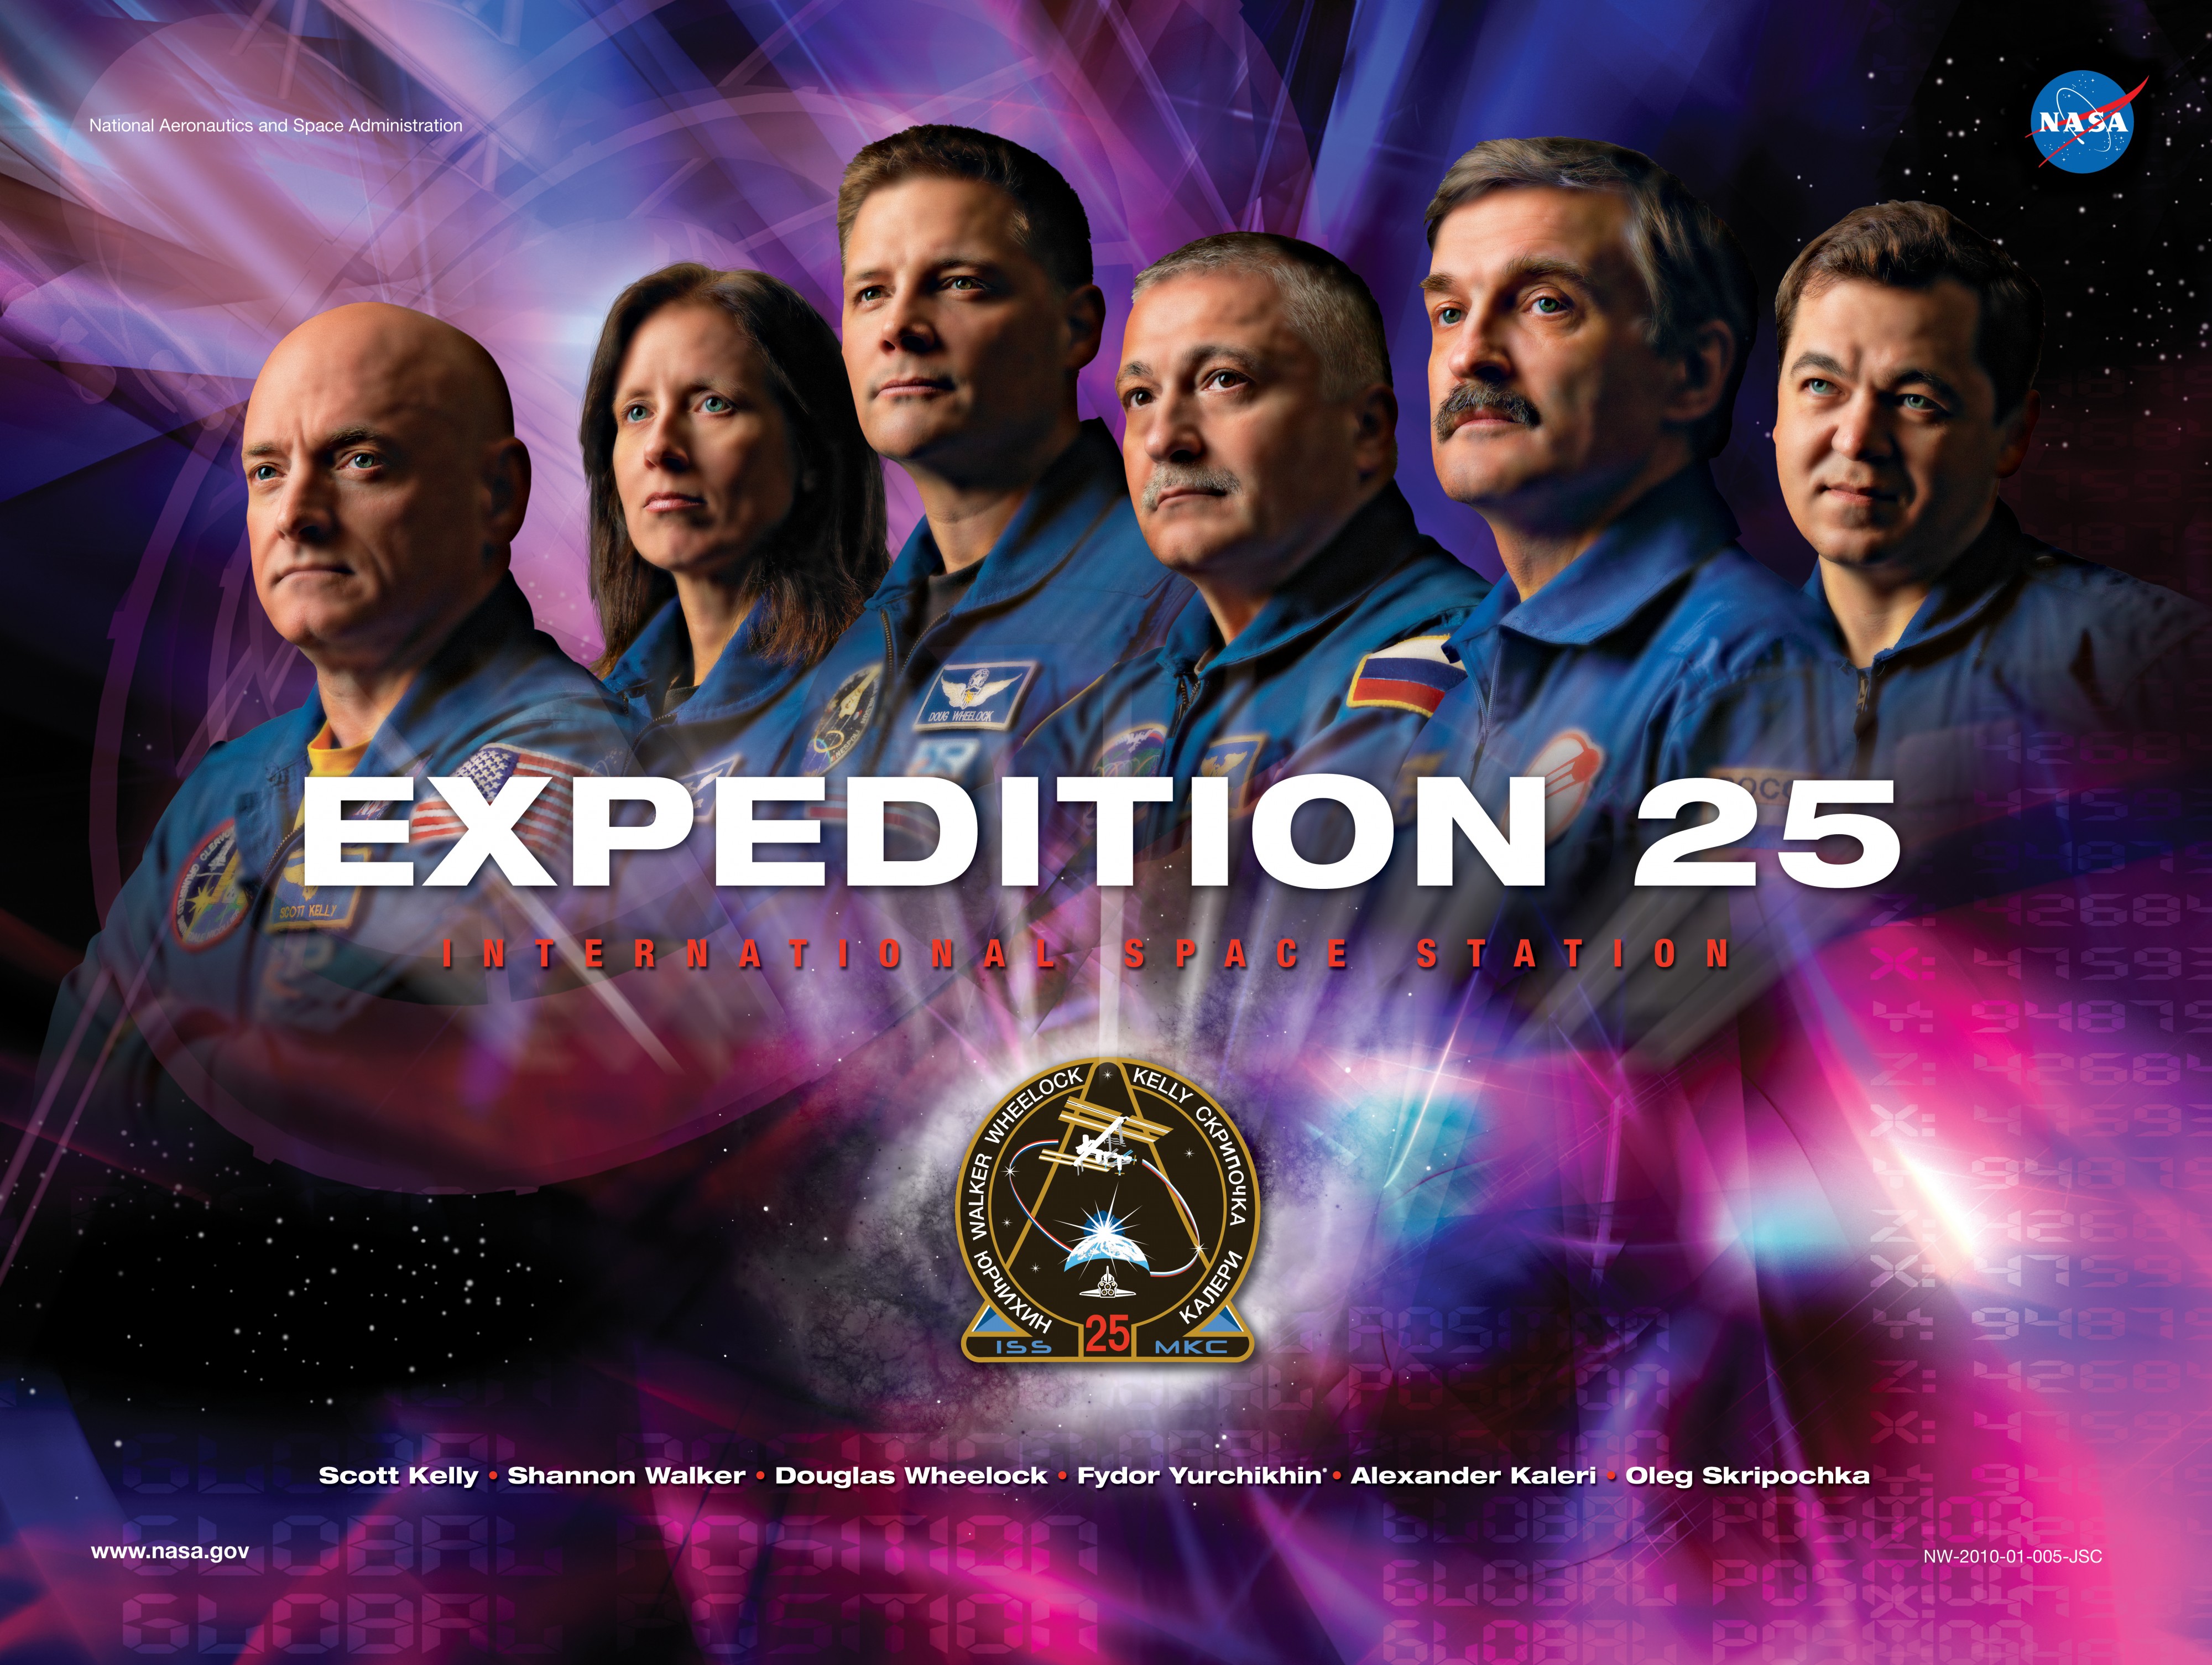 Expedition 25 Mission Poster